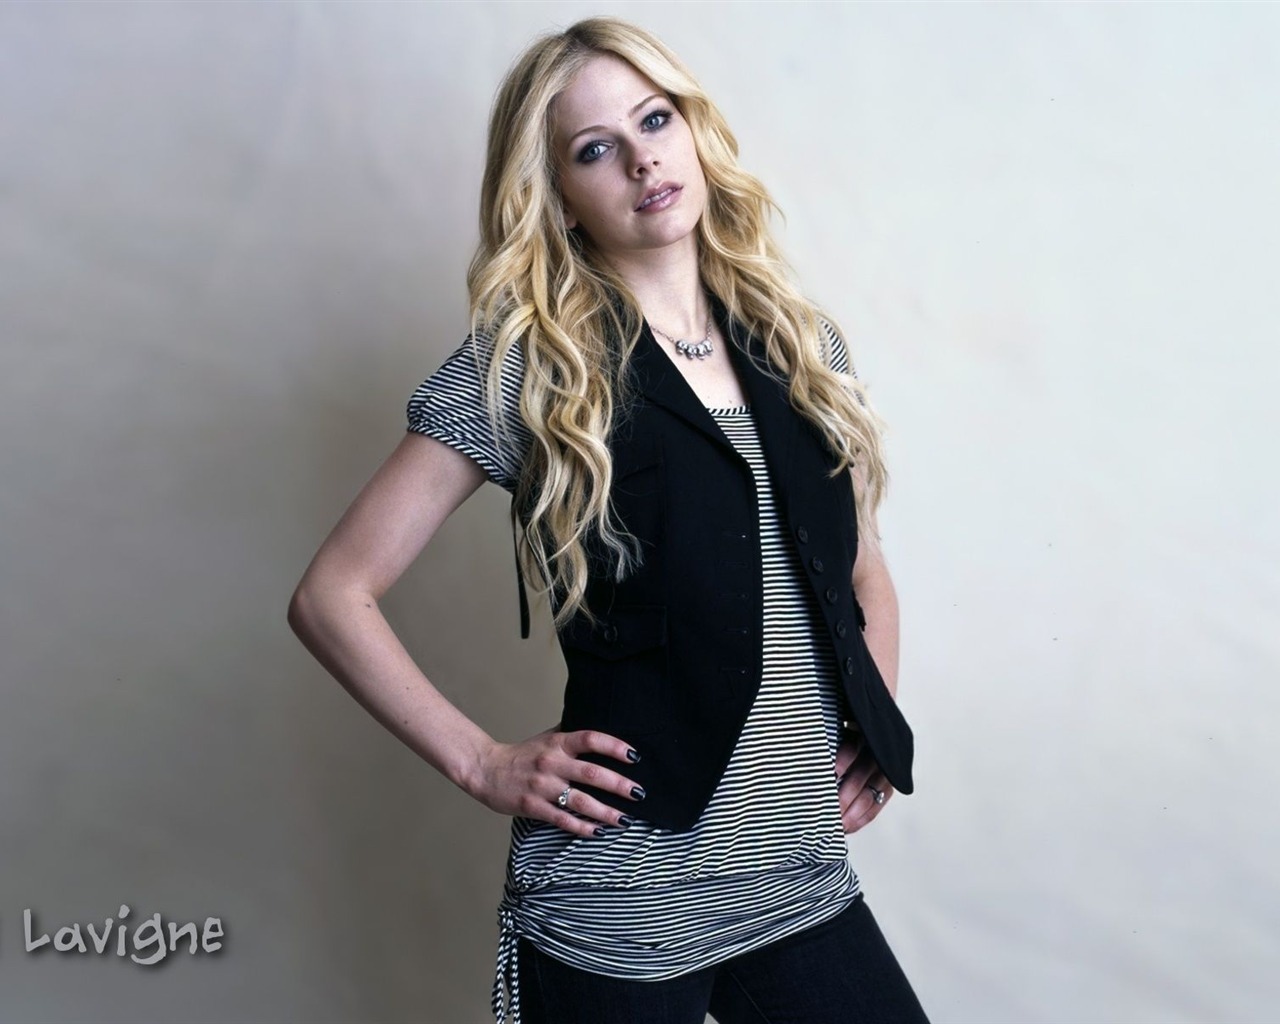 Avril Lavigne #076 - 1280x1024 Wallpapers Pictures Photos Images